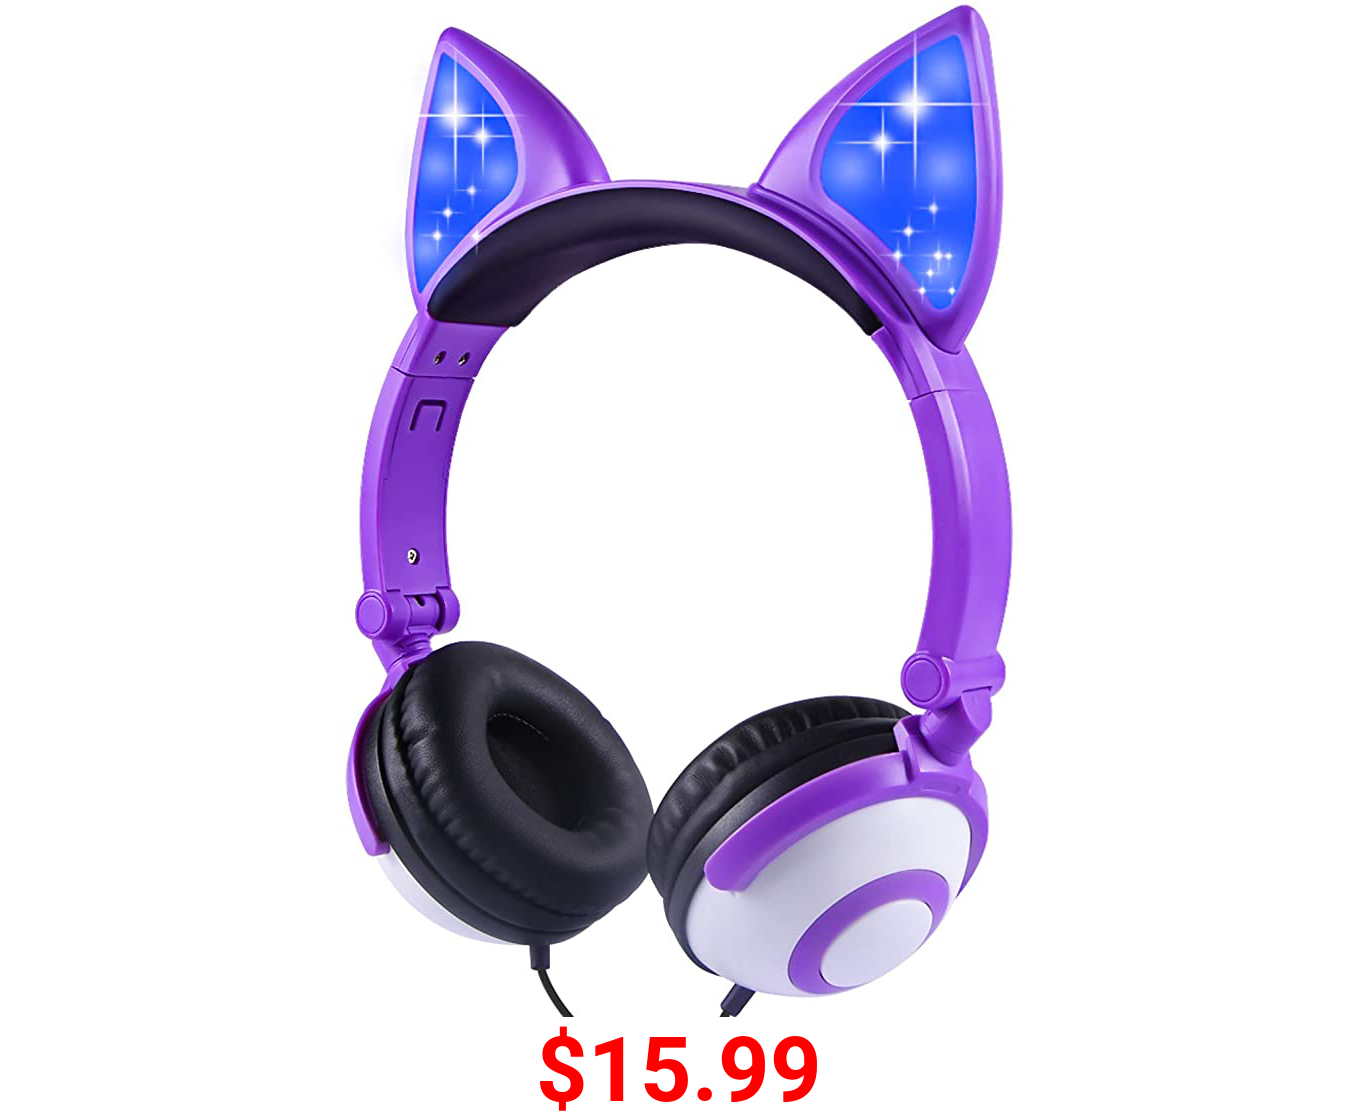 Kids Headphones Foldable with LED Glowing Cat Ear, On-Ear Headset Safe Wired Kids Headsets 85dB Volume Limited, Food Grade Silicone, 3.5mm Aux Jack, Fox Ear -Inspired Purple Headphones for Children